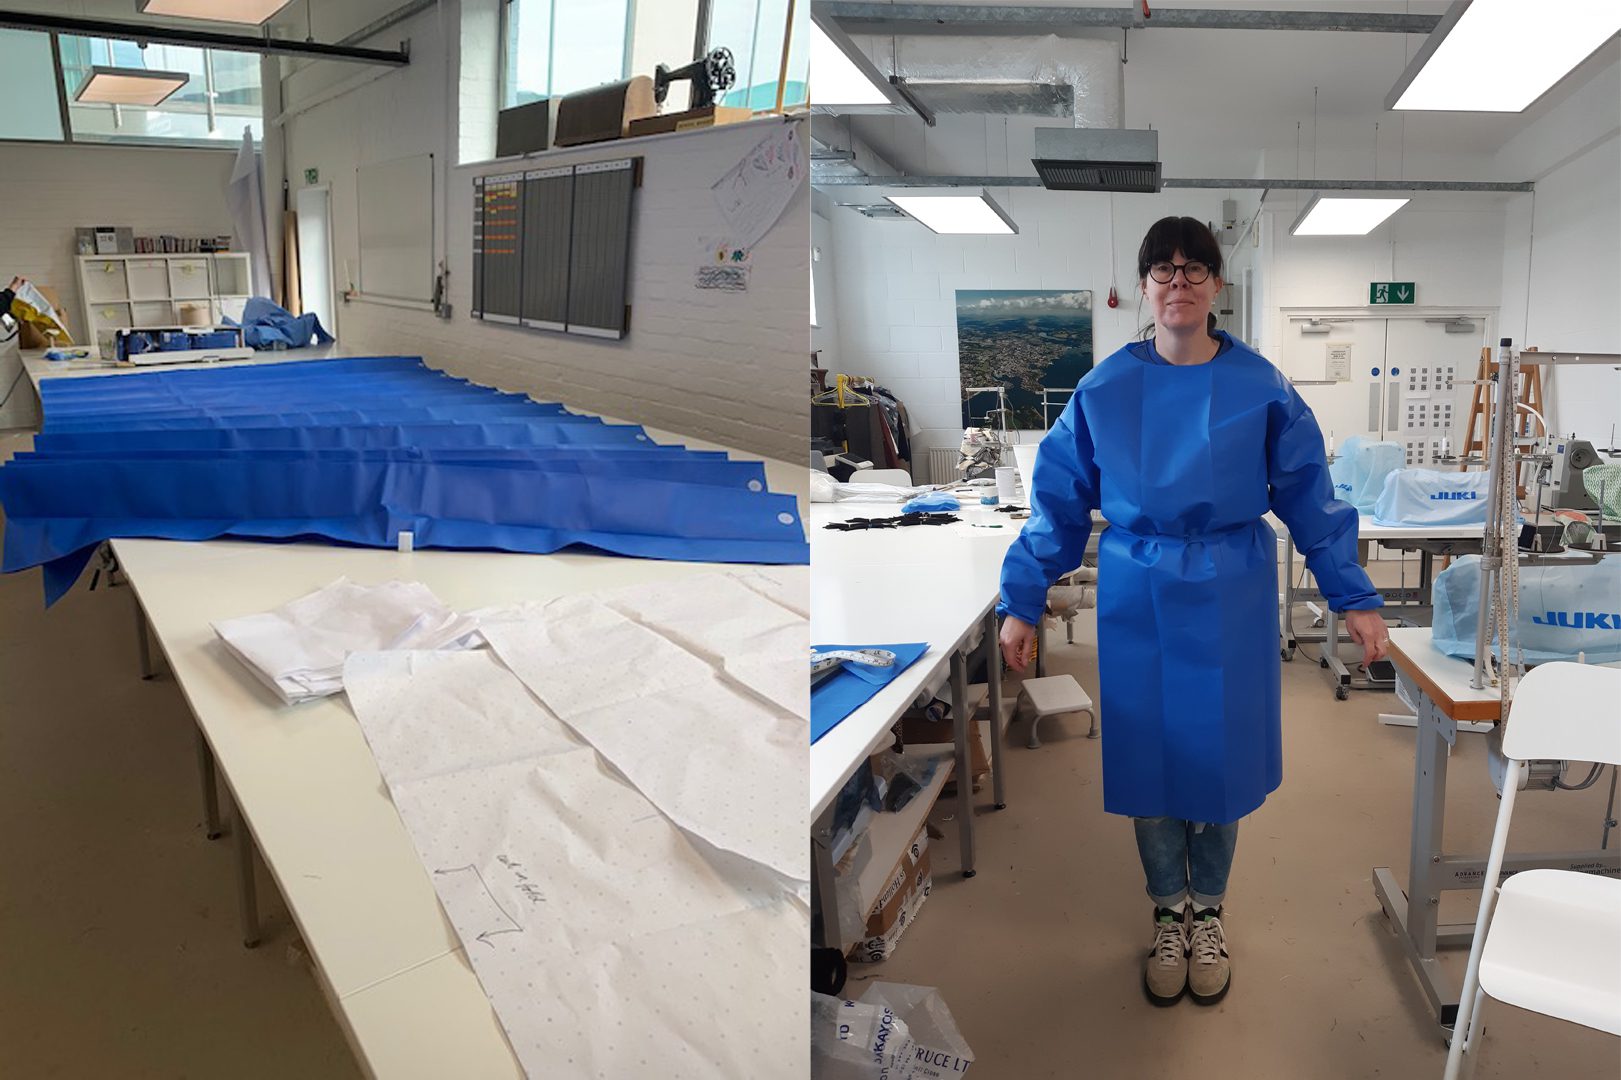 Makers HQ supports Plymouth health workers by making workwear for COVID-19 testing site